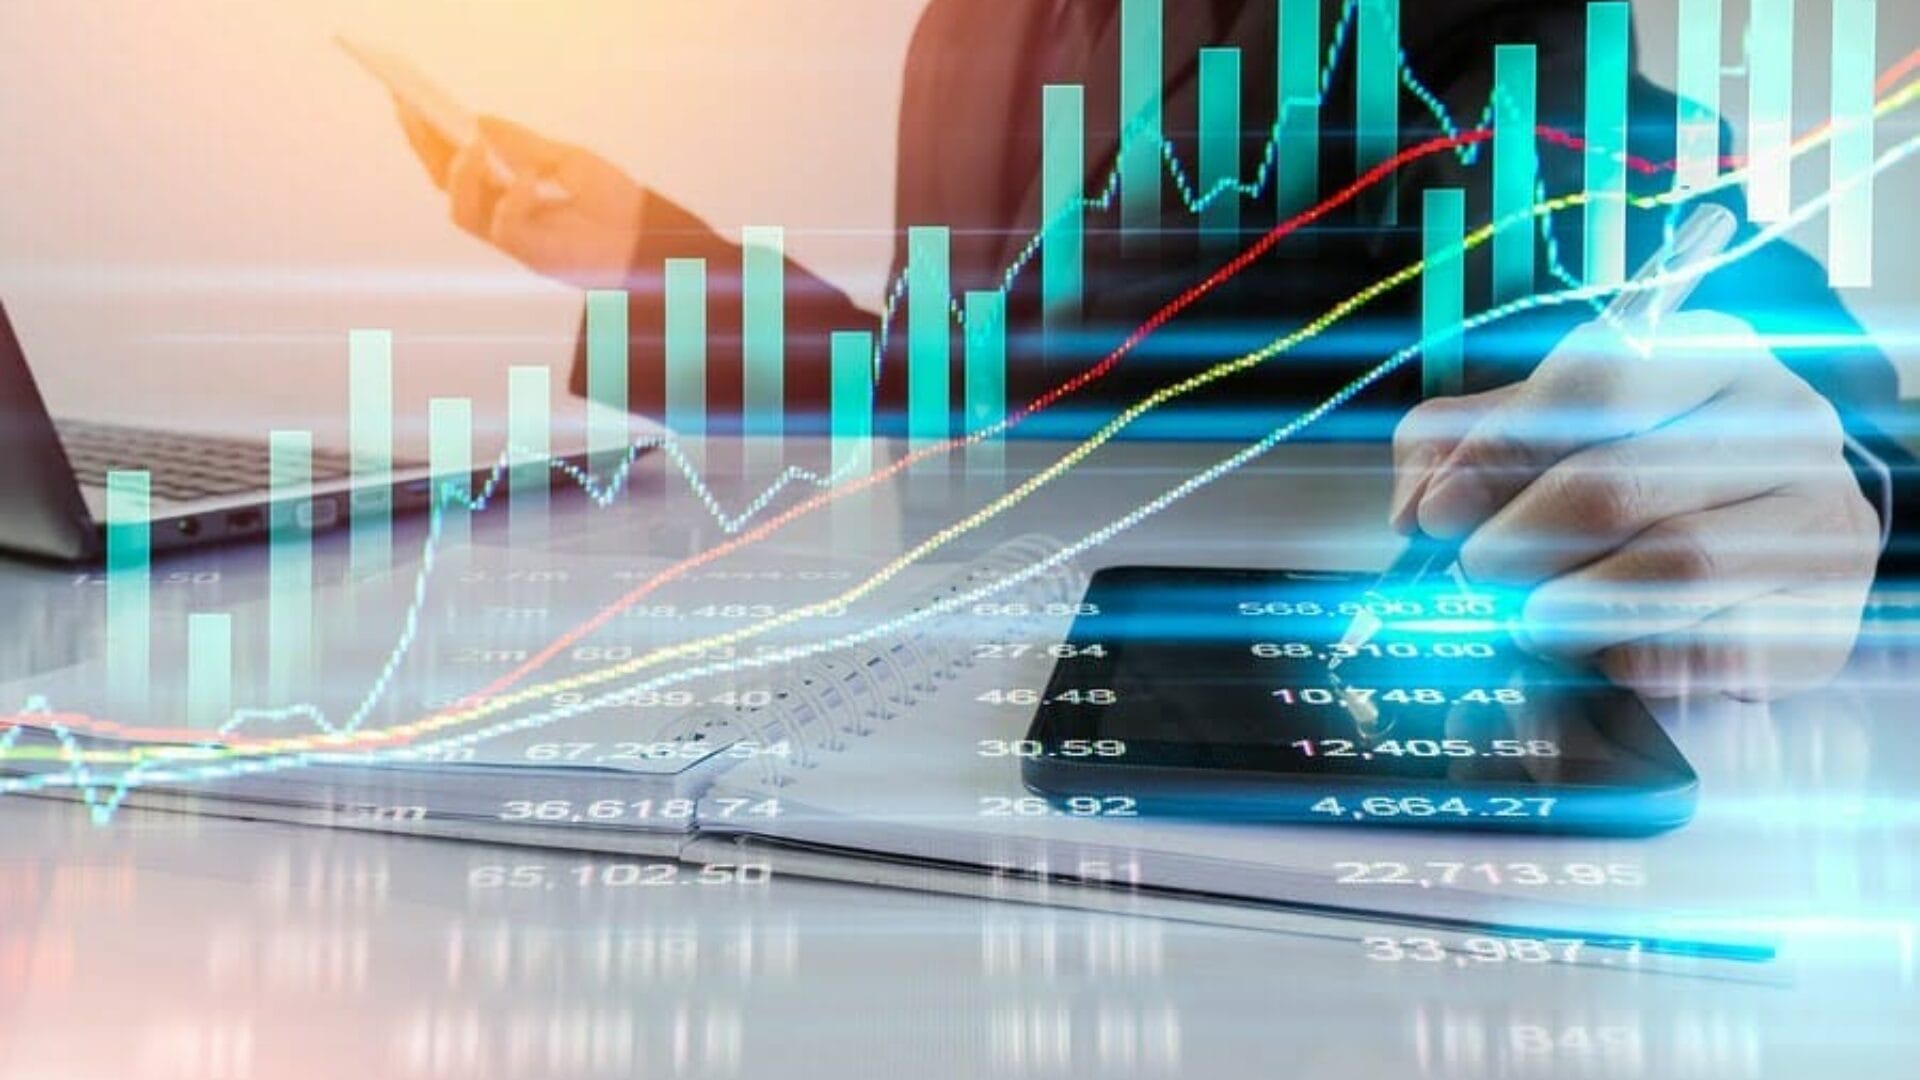 Business man on stock market data or financial analysis. Stock market graph. Stock market indicator. Stock market financial graph. Stock market analysis. Financial statistic analysis, business strategy, business content, business background